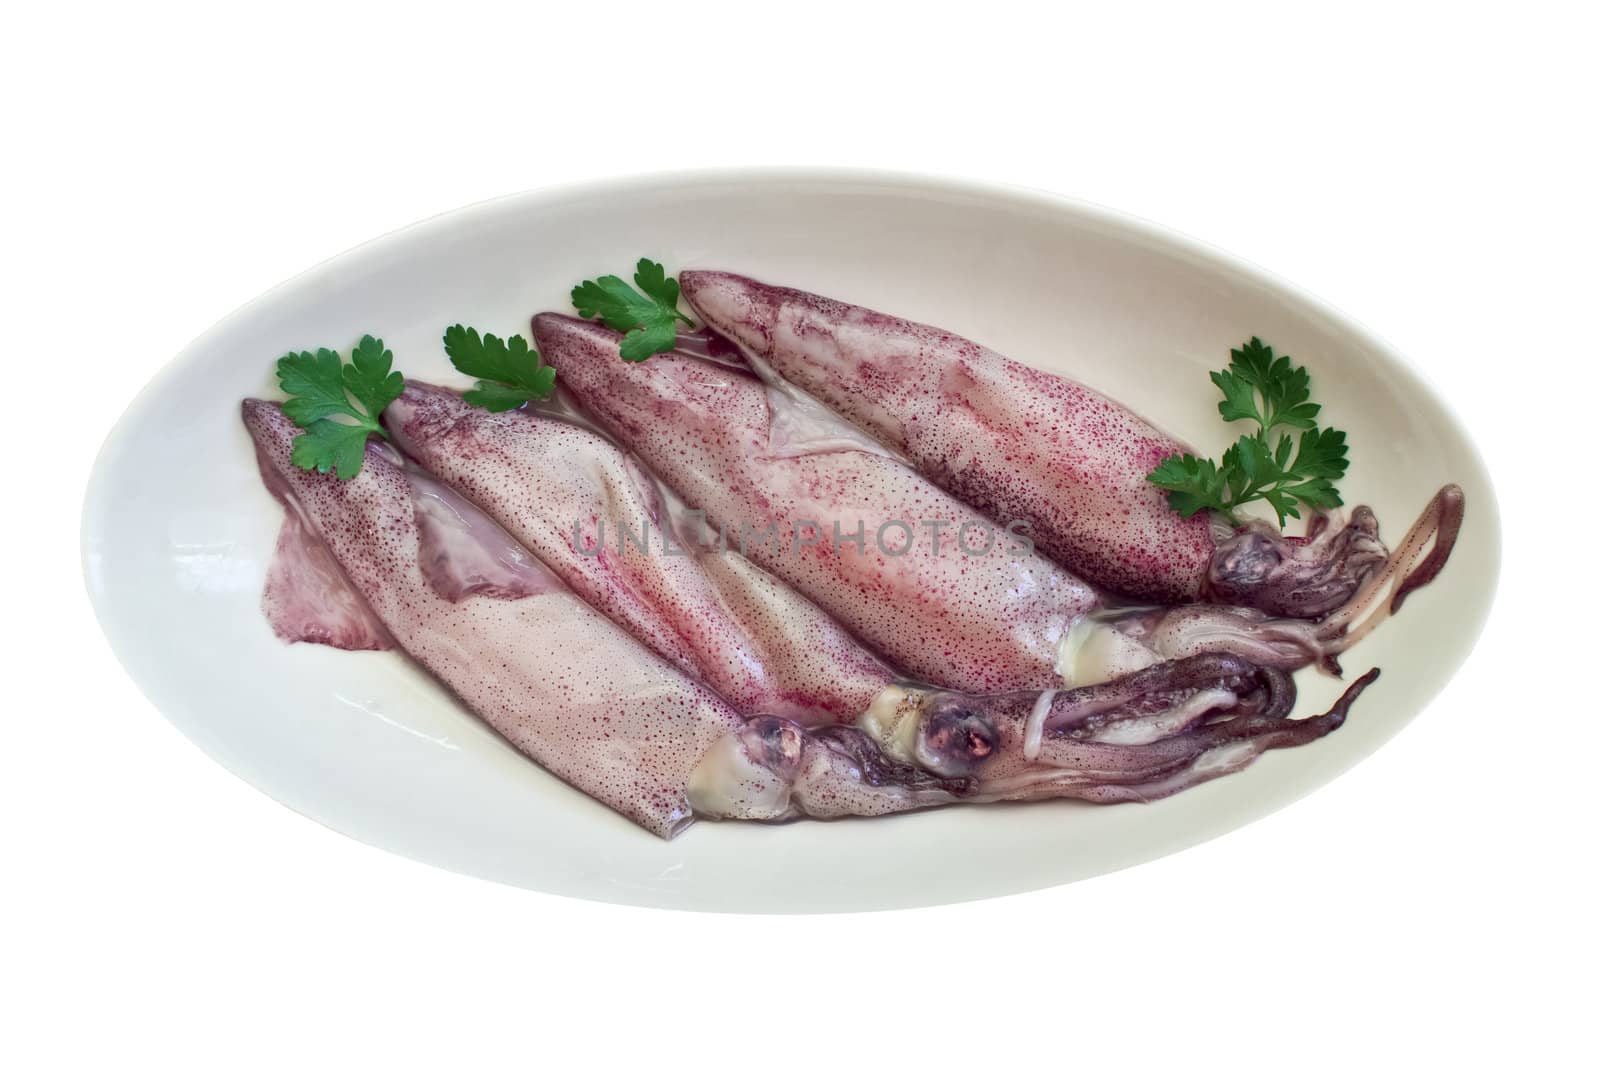 Fresh squid n in plate isolated on white